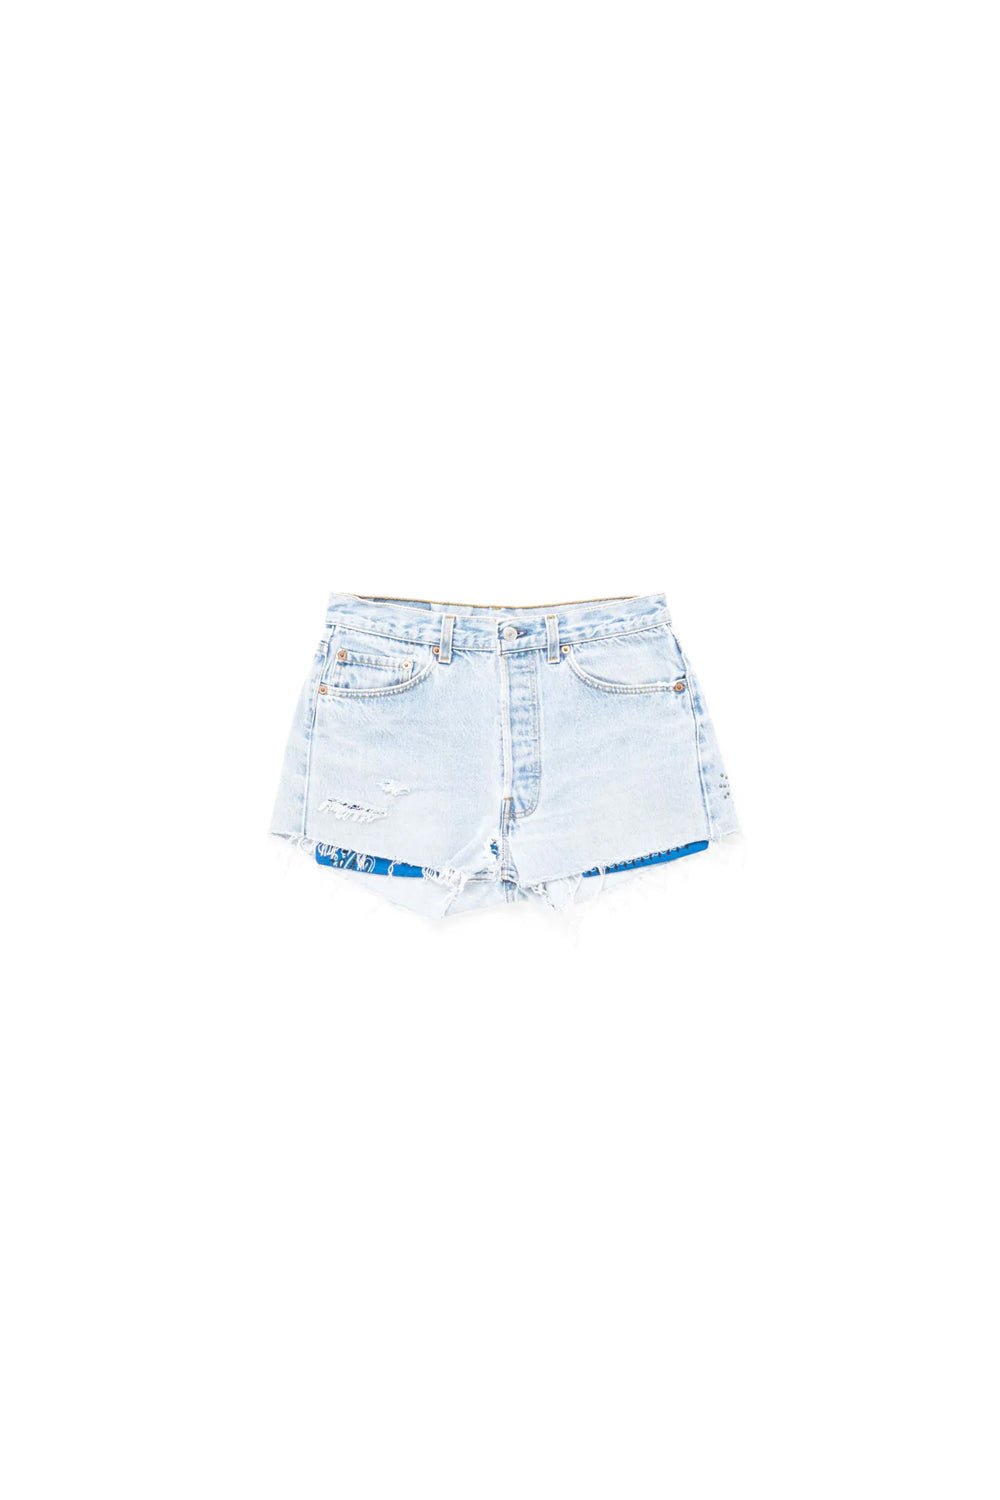 VINTAGE BANDANA SHORTS Levi's vintage denim shorts. Customized shorts with vintage bandana applicated inside. Every piece is 'one of a kind', designed using handcrafted materials. As a result of this process there will be variations in the shade of the co